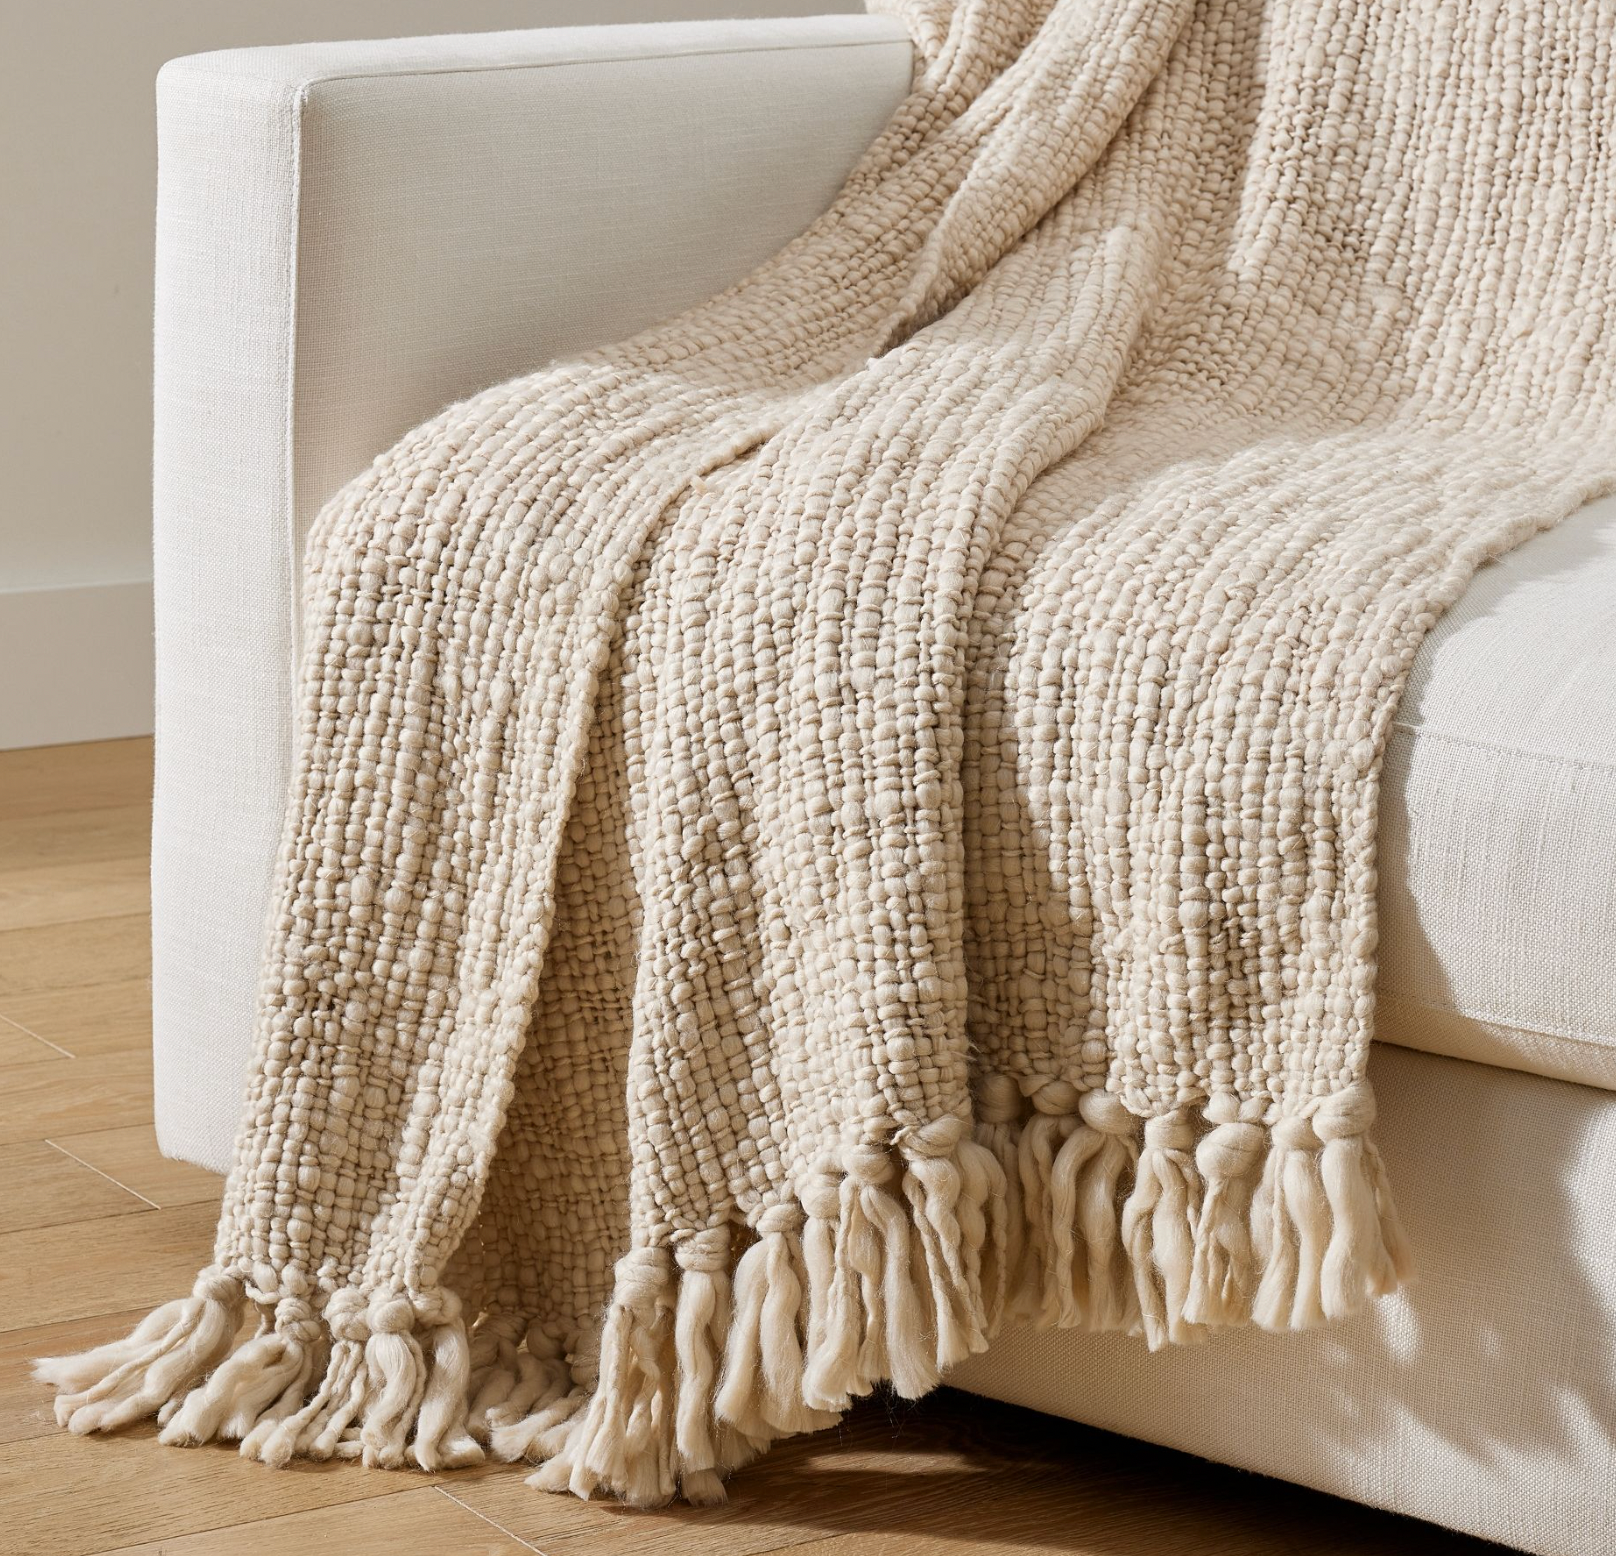 Pottery Barn + Textured Basketweave Knit Throw